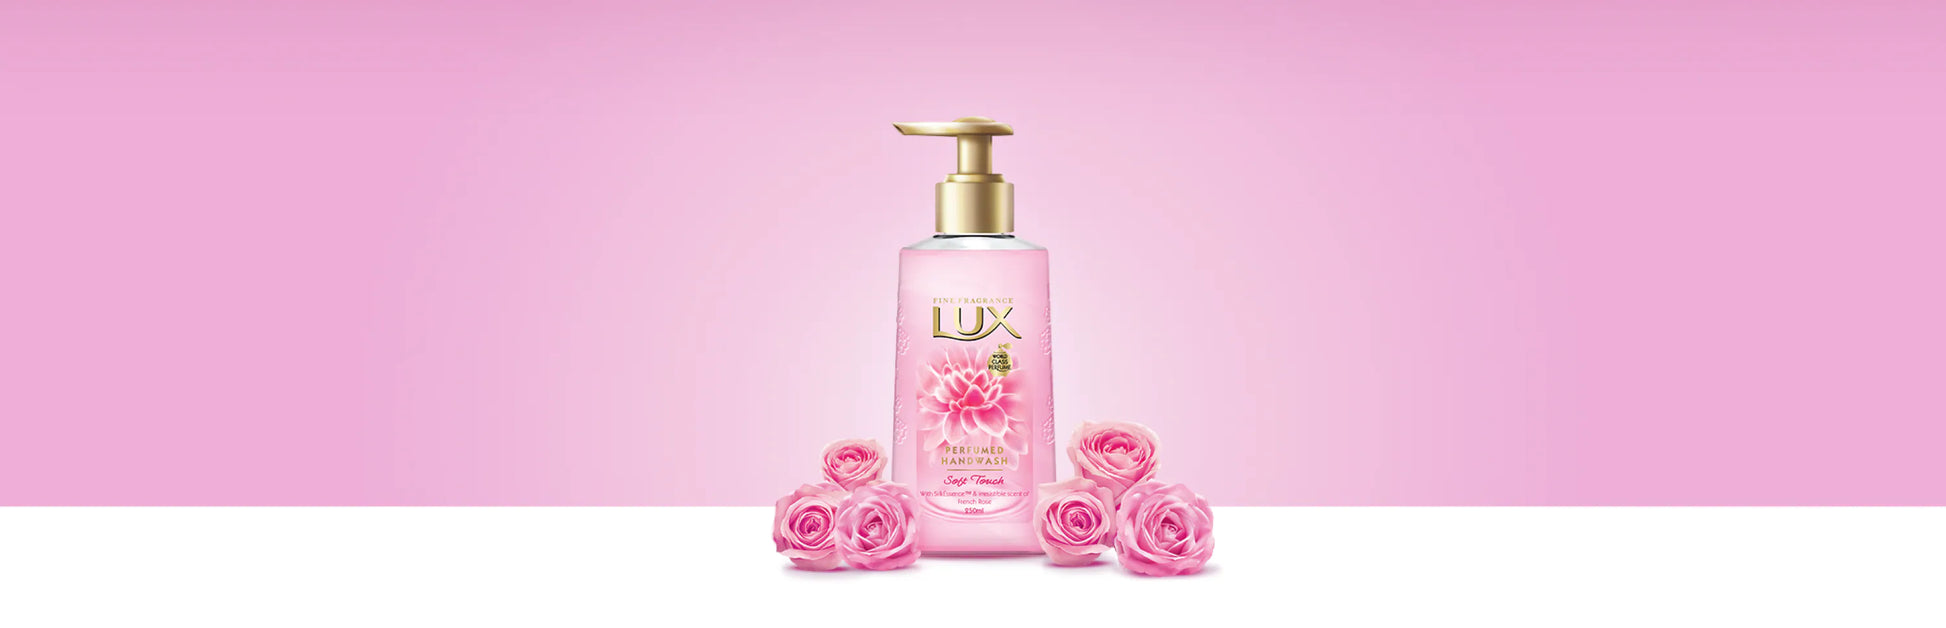 LUX Perfumed Soft Touch Hand Wash 500ml - Medaid - Lebanon